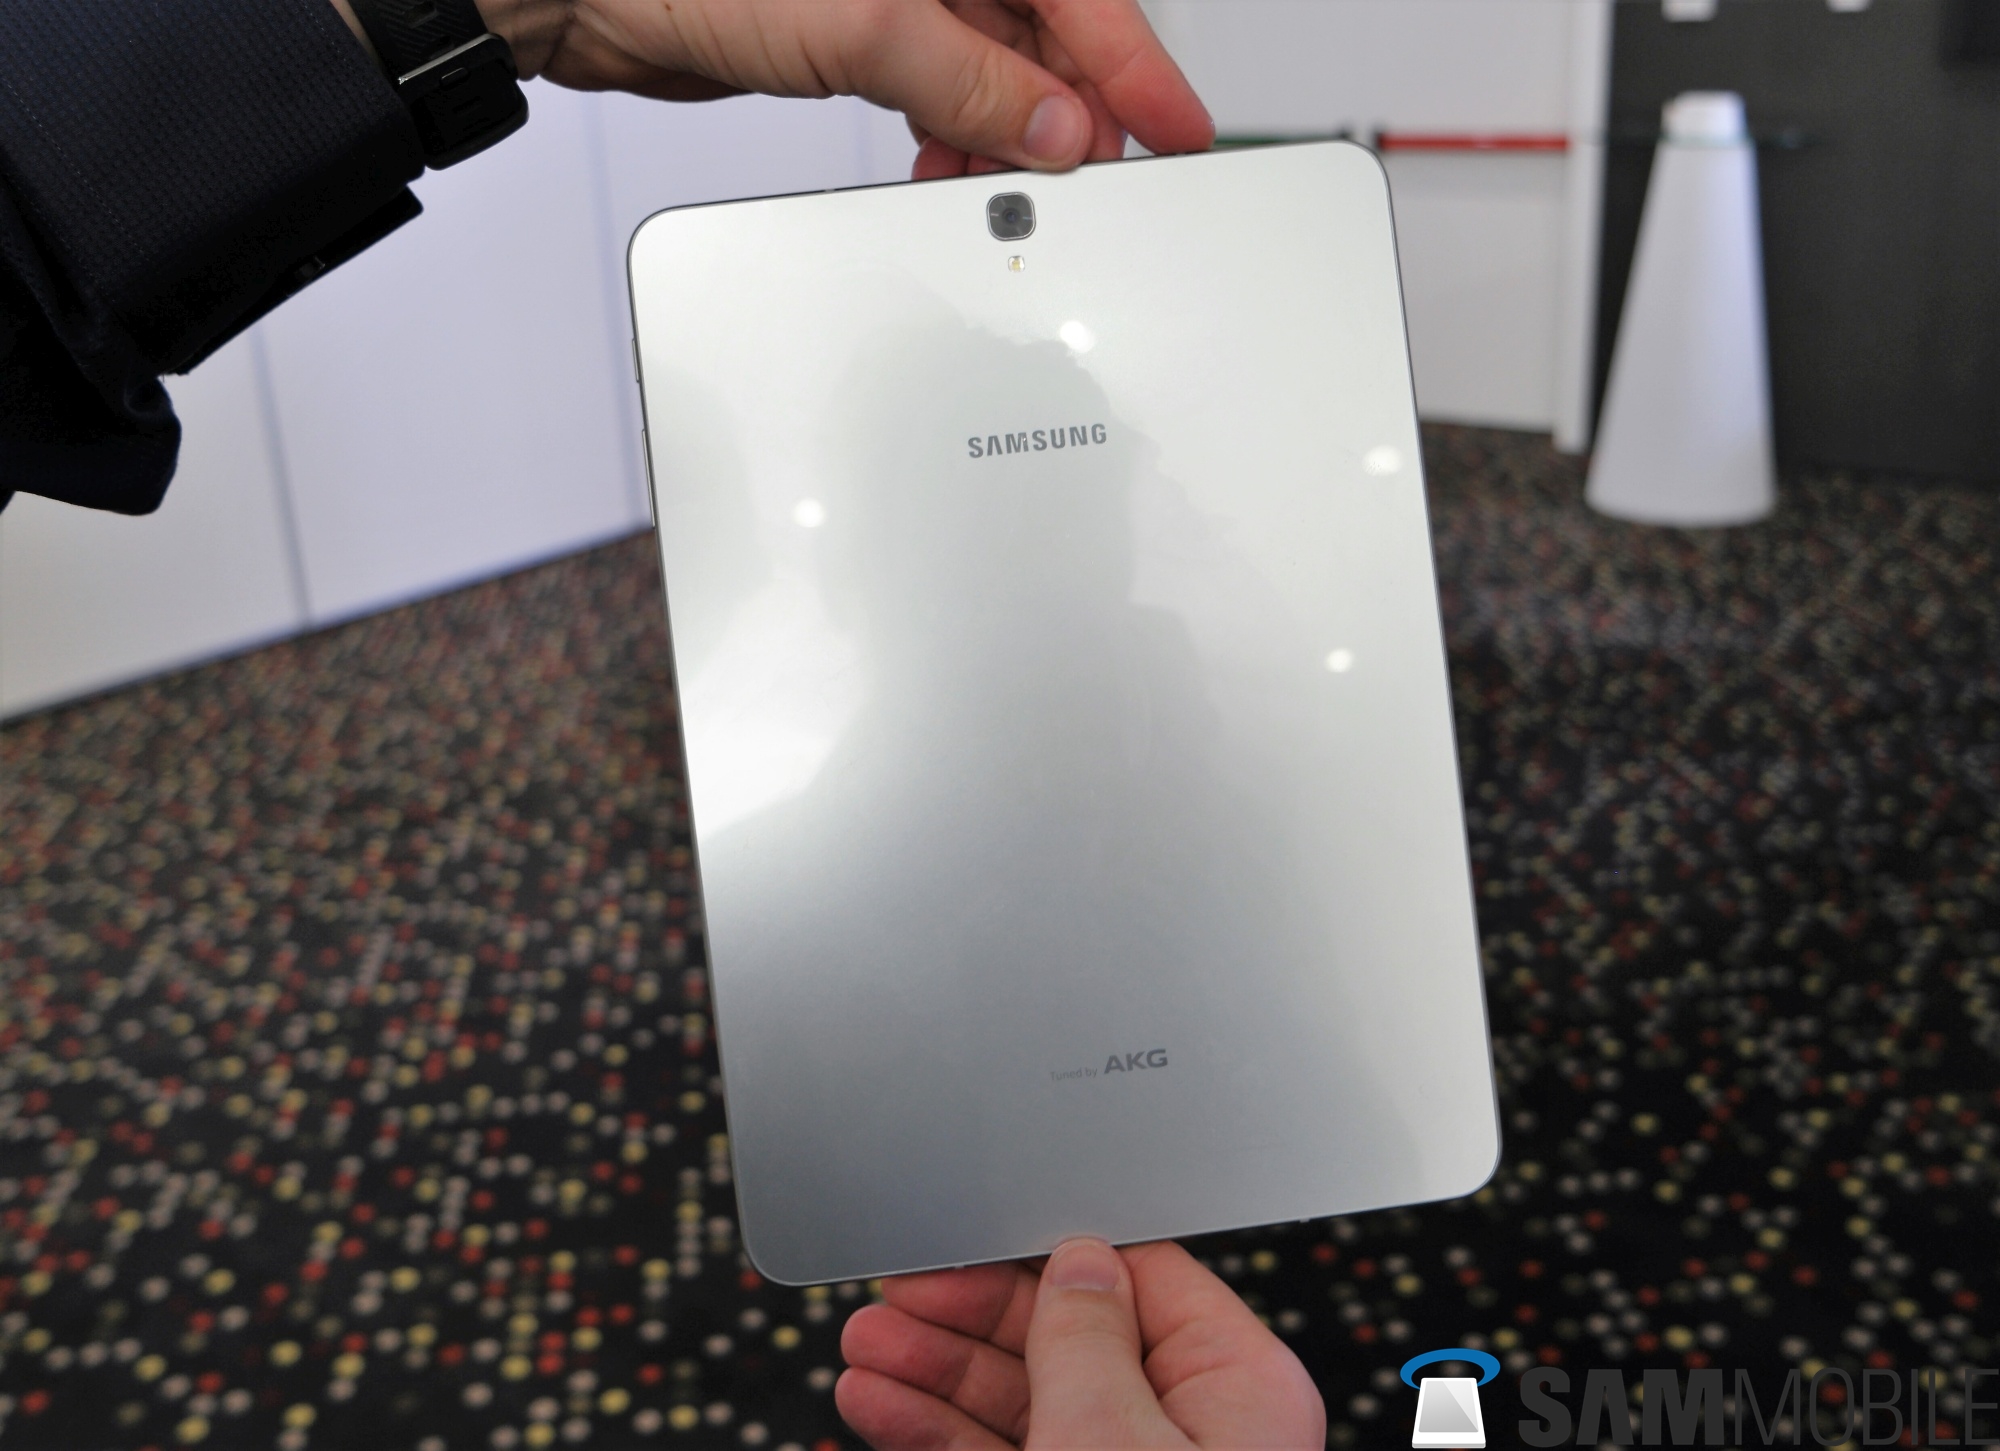 The best features of the Samsung Galaxy Tab S3 - SamMobile - SamMobile